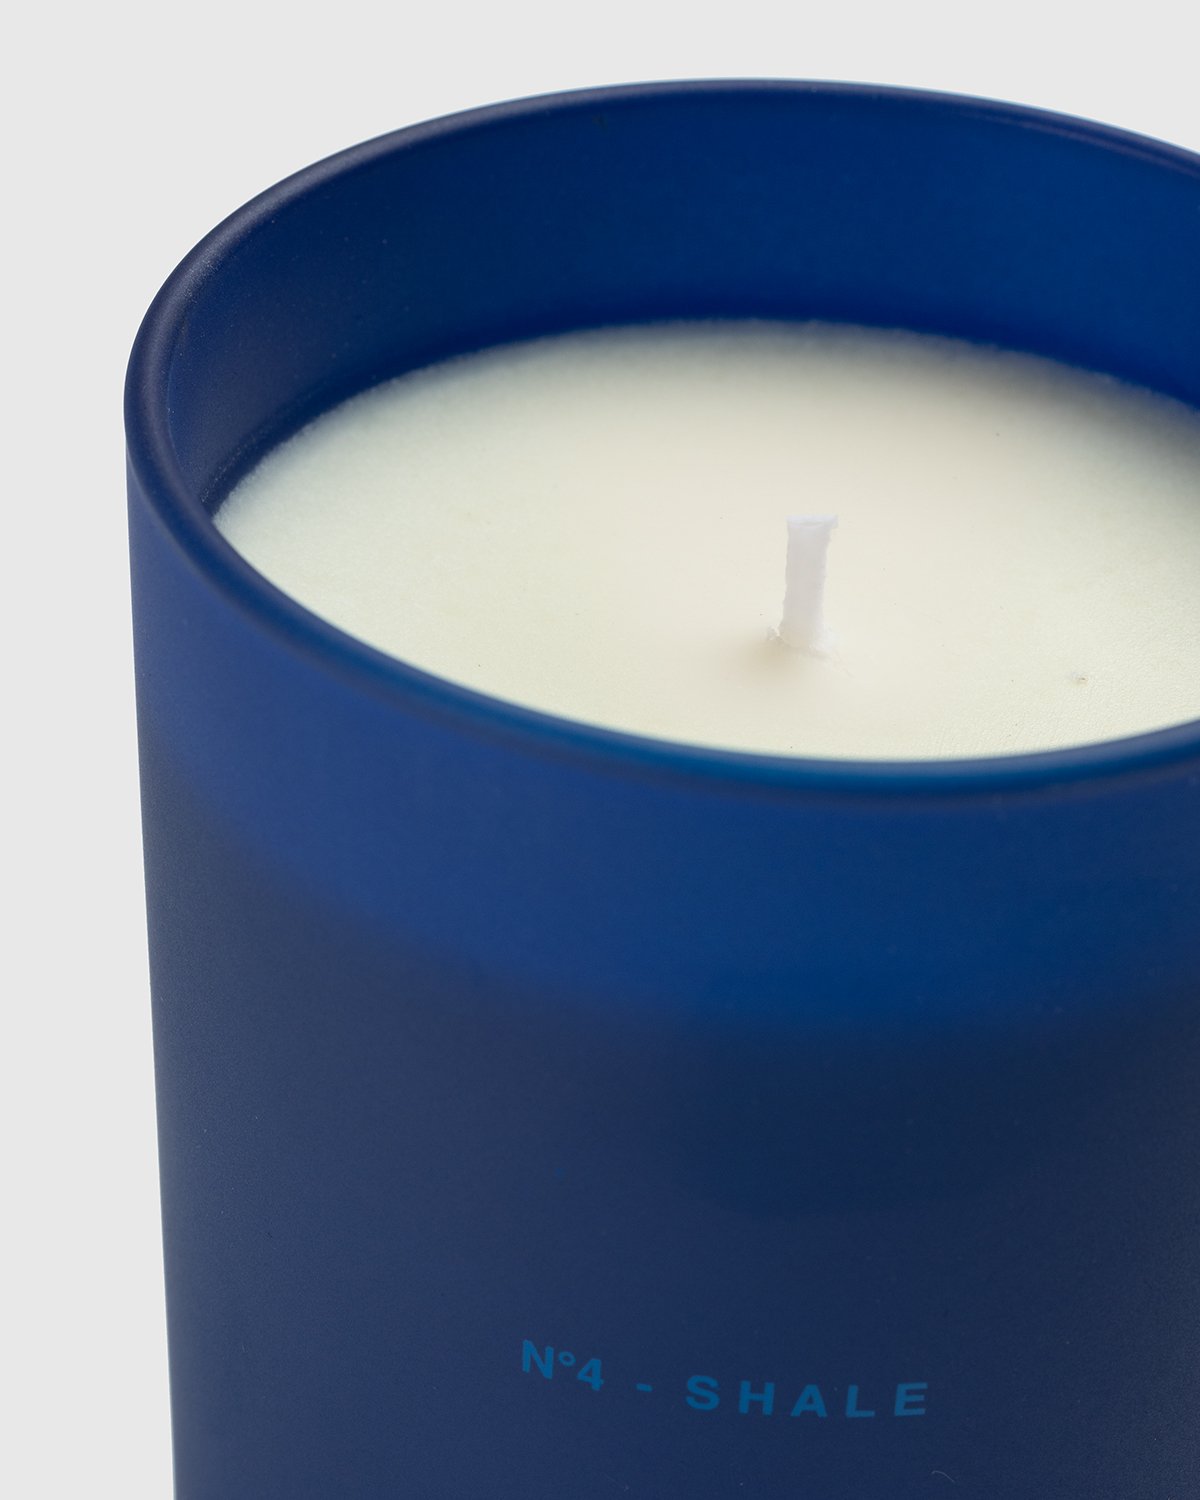 A-Cold-Wall* - No. 4 Shale Candle - Lifestyle - Blue - Image 2